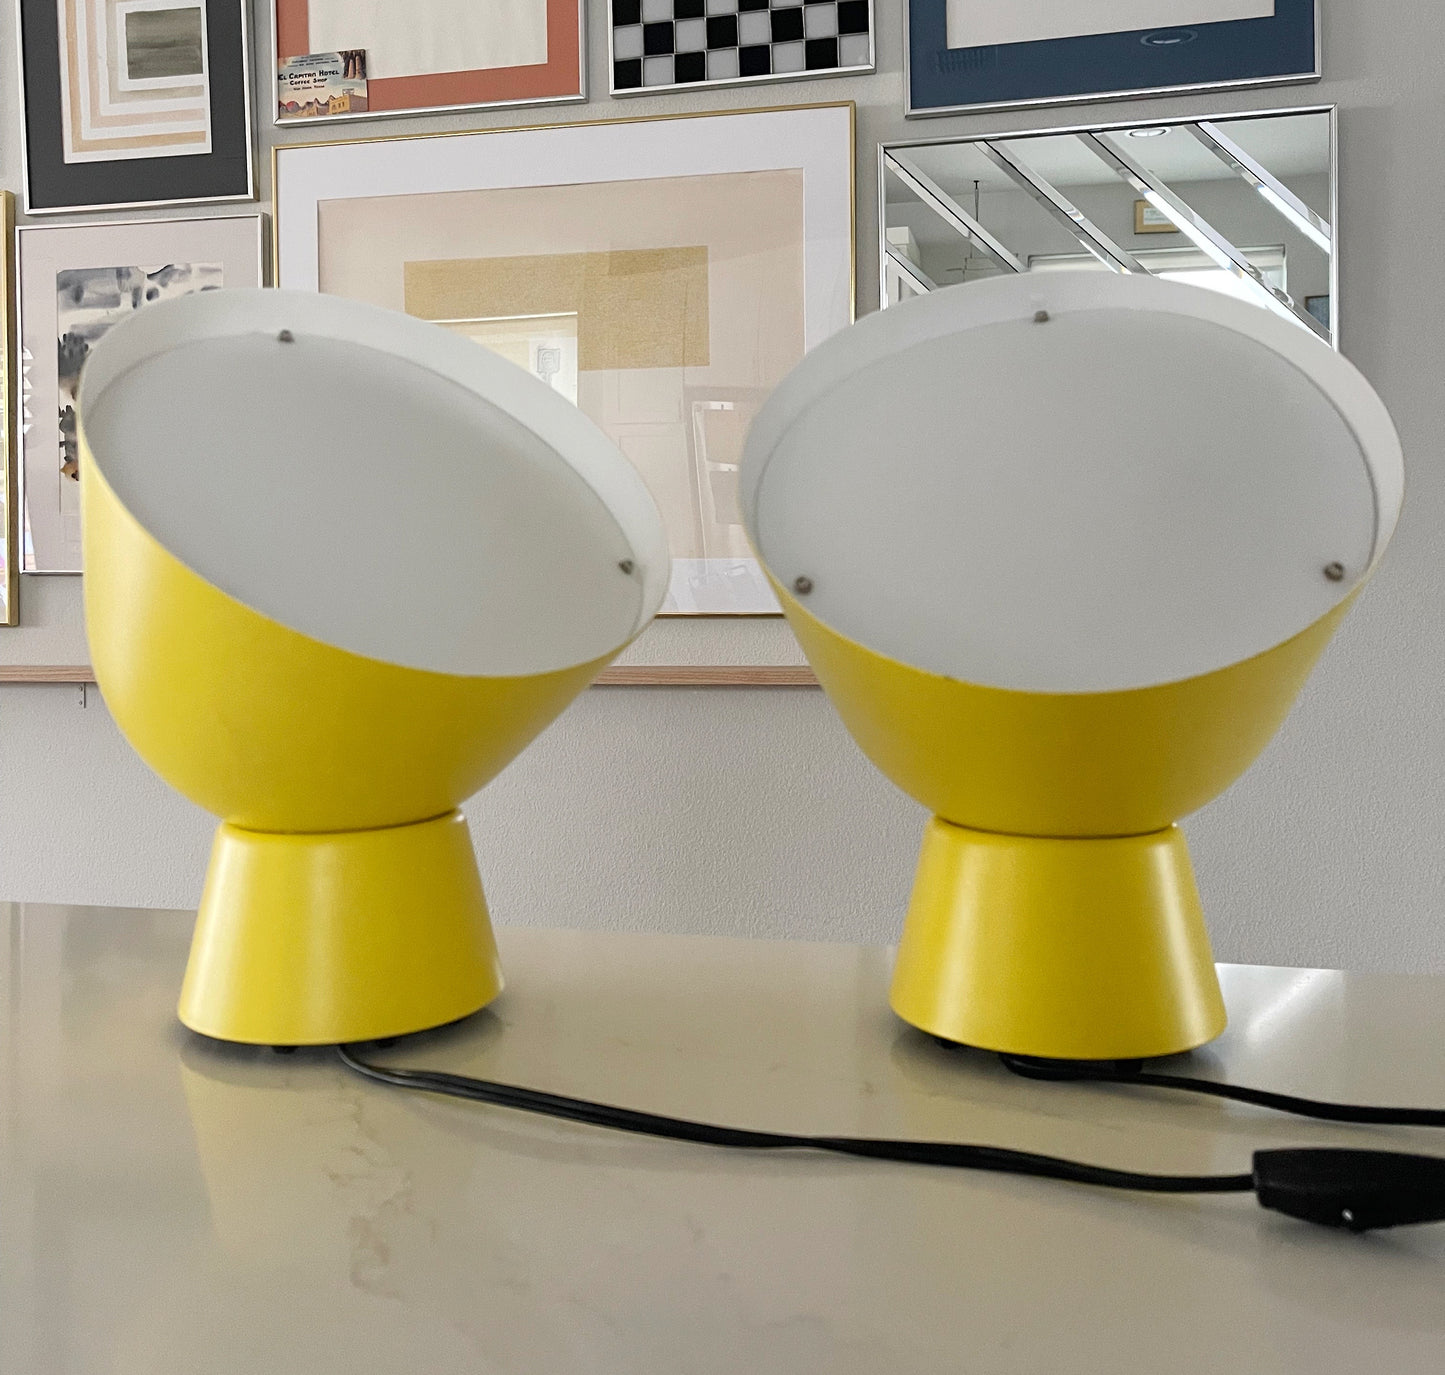 Pair of Yellow Table/Wall Lamps by Designer Ola WIHLBORG for IKEA